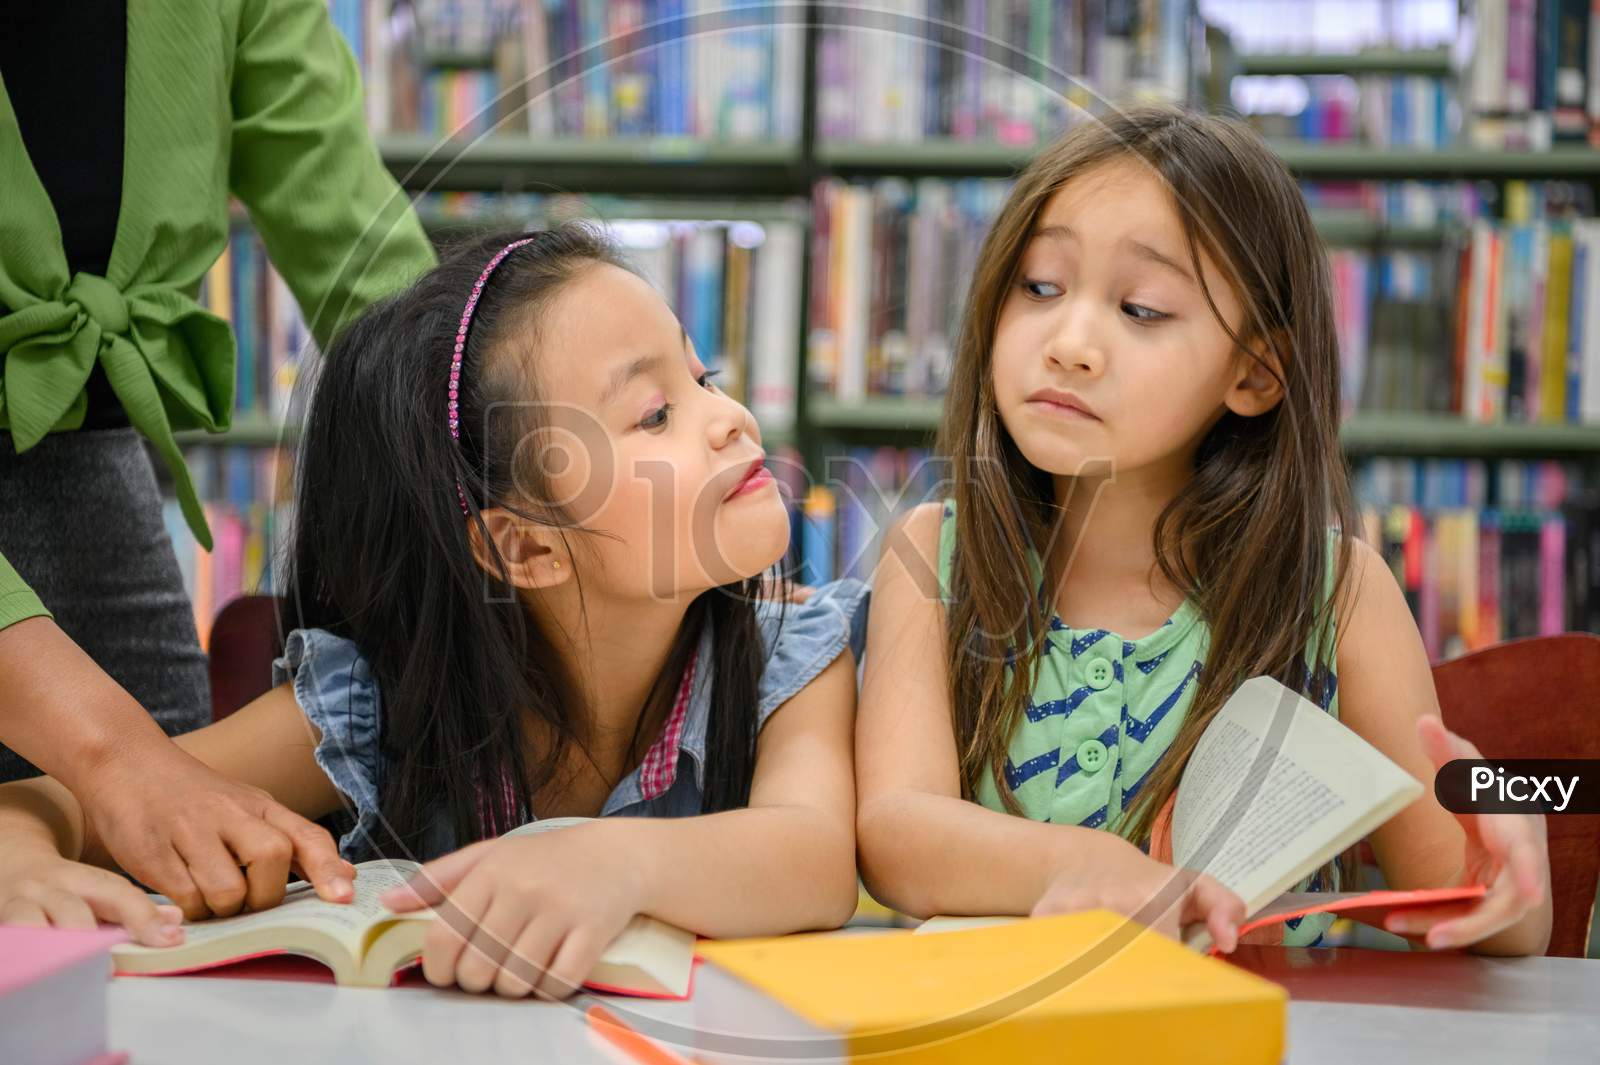 Two Cute Girls Are Jealous Of Each Other While Reading Books In Library While Teacher Teaching. People Lifestyles And Education. Young Friendship And Kids Relationship In School Concept. Daycare Theme